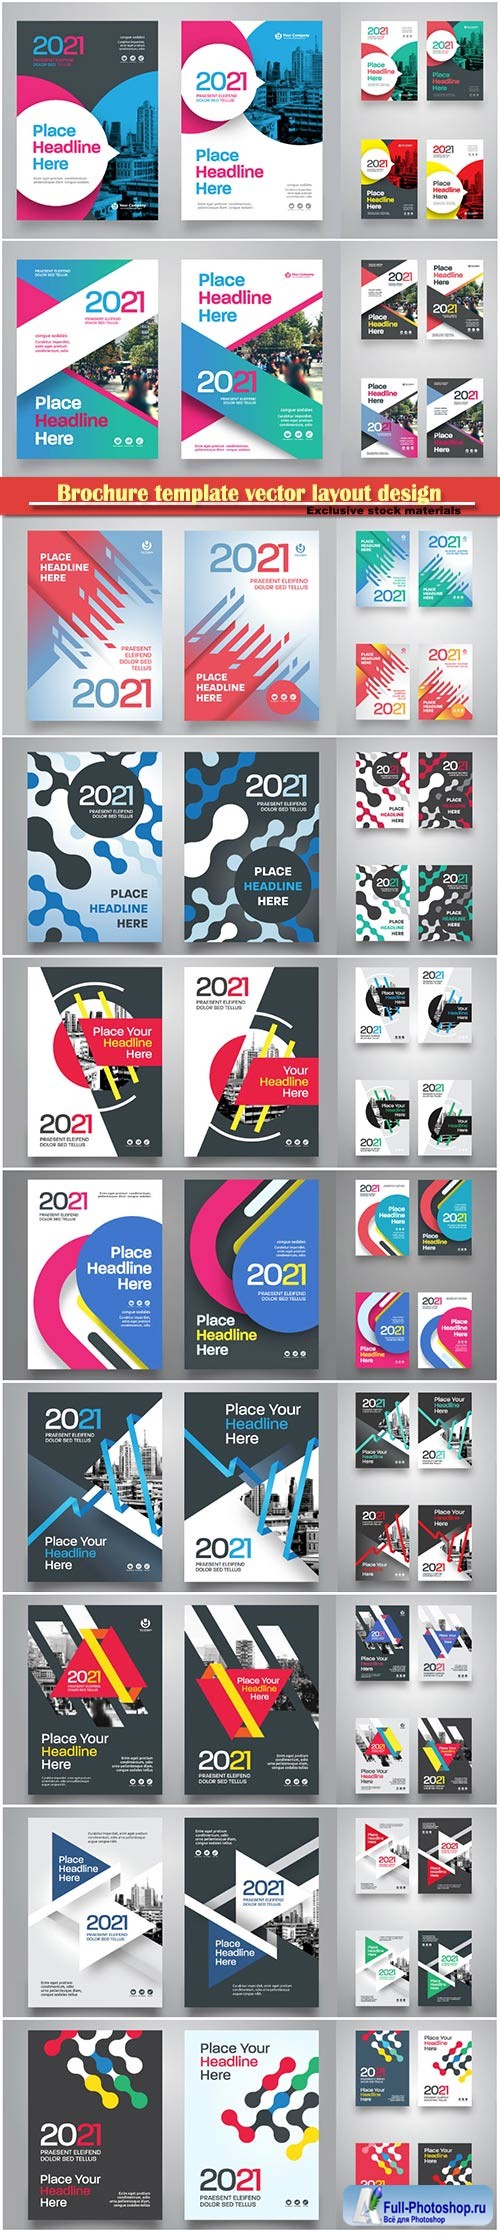 Brochure template vector layout design, corporate business annual report, magazine, flyer mockup # 145